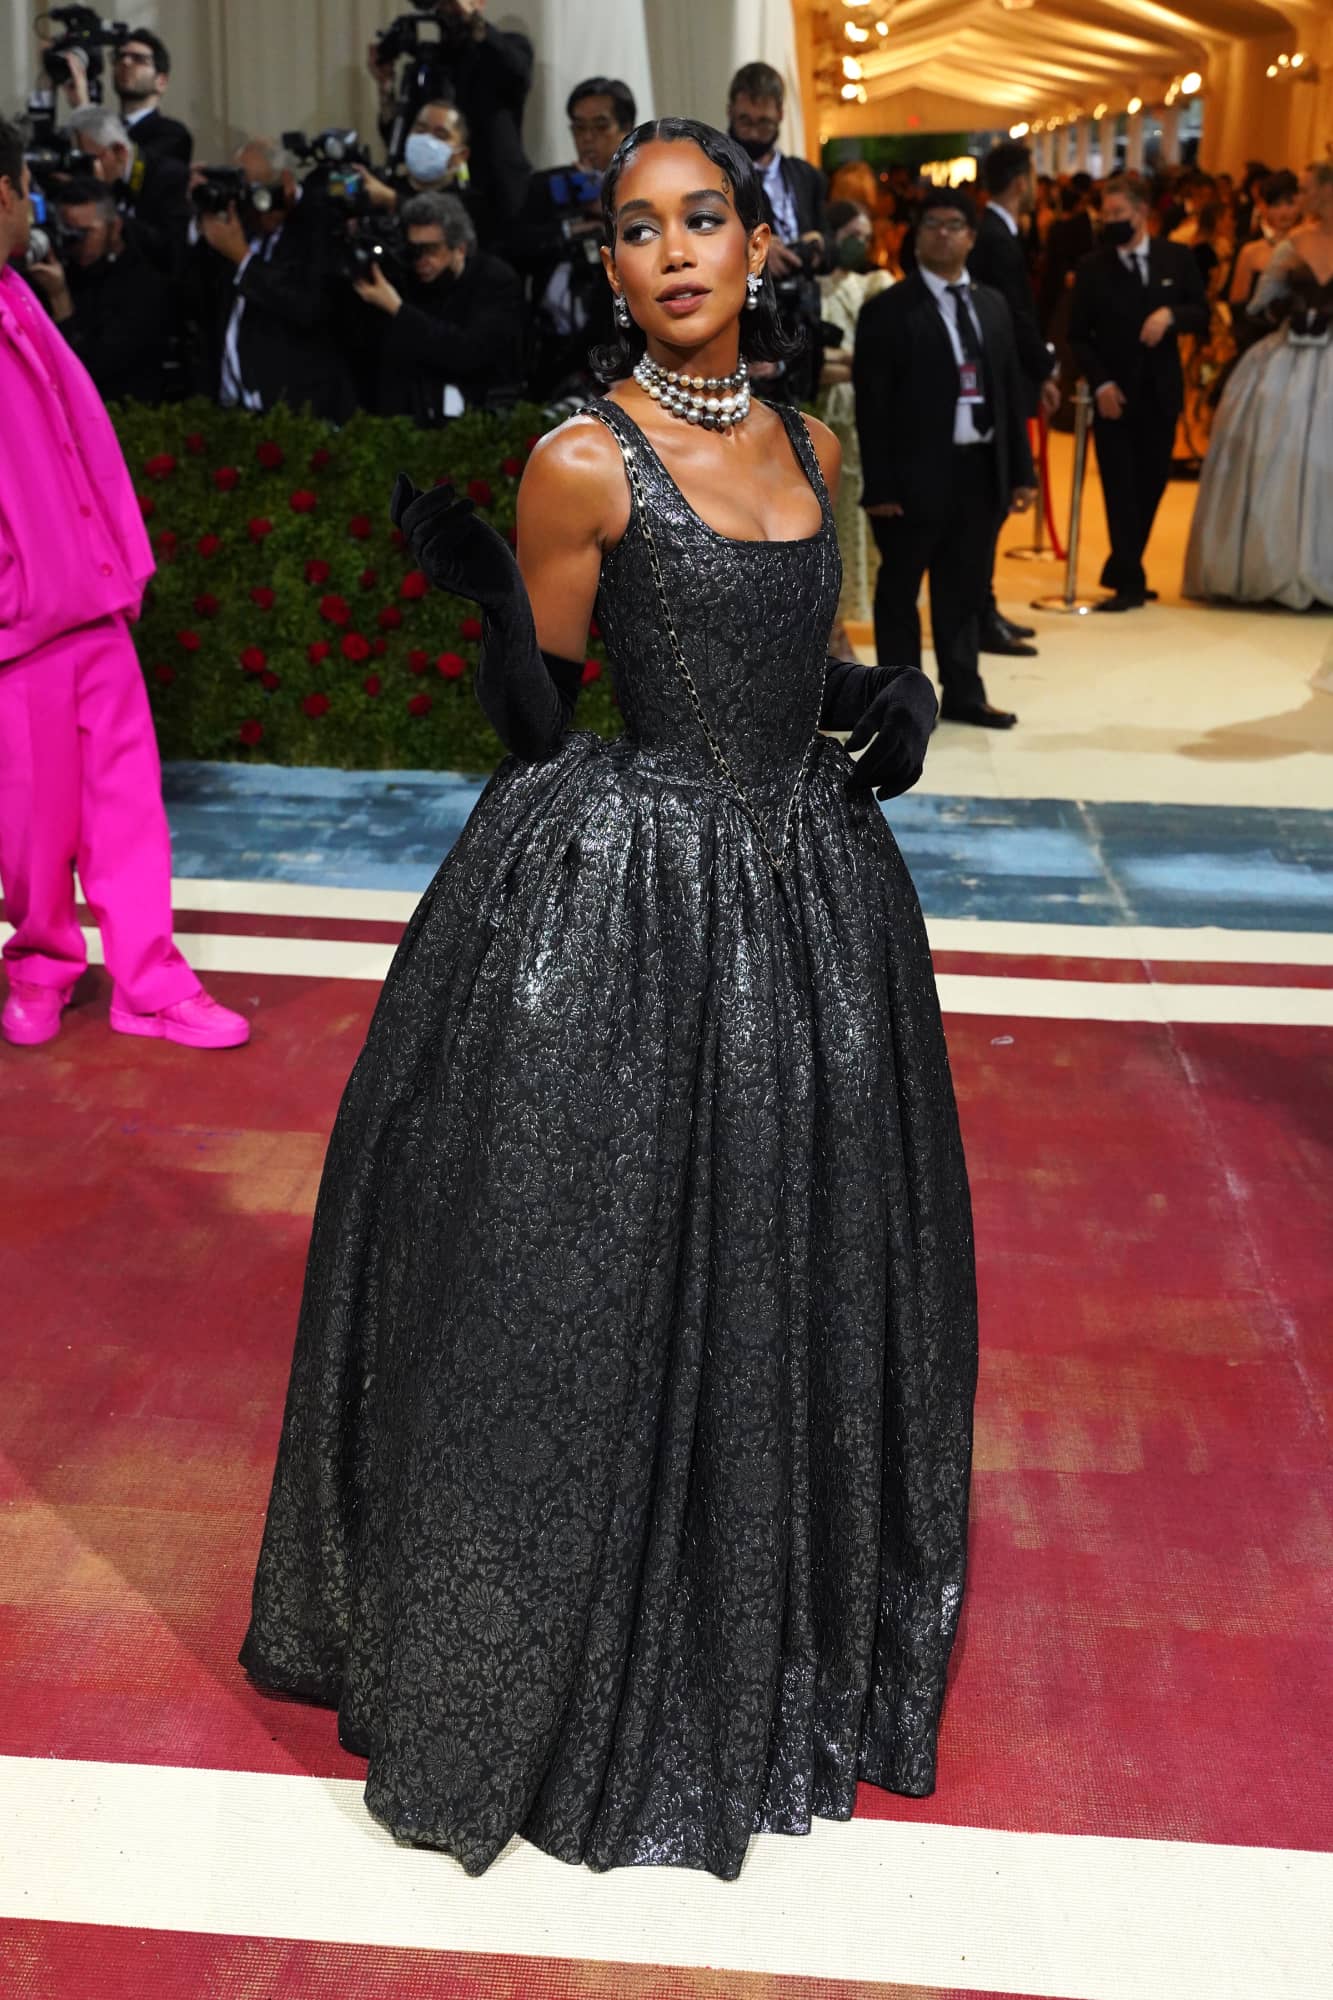 Met Gala 2021: Red Carpet Looks That Absolutely Nailed It